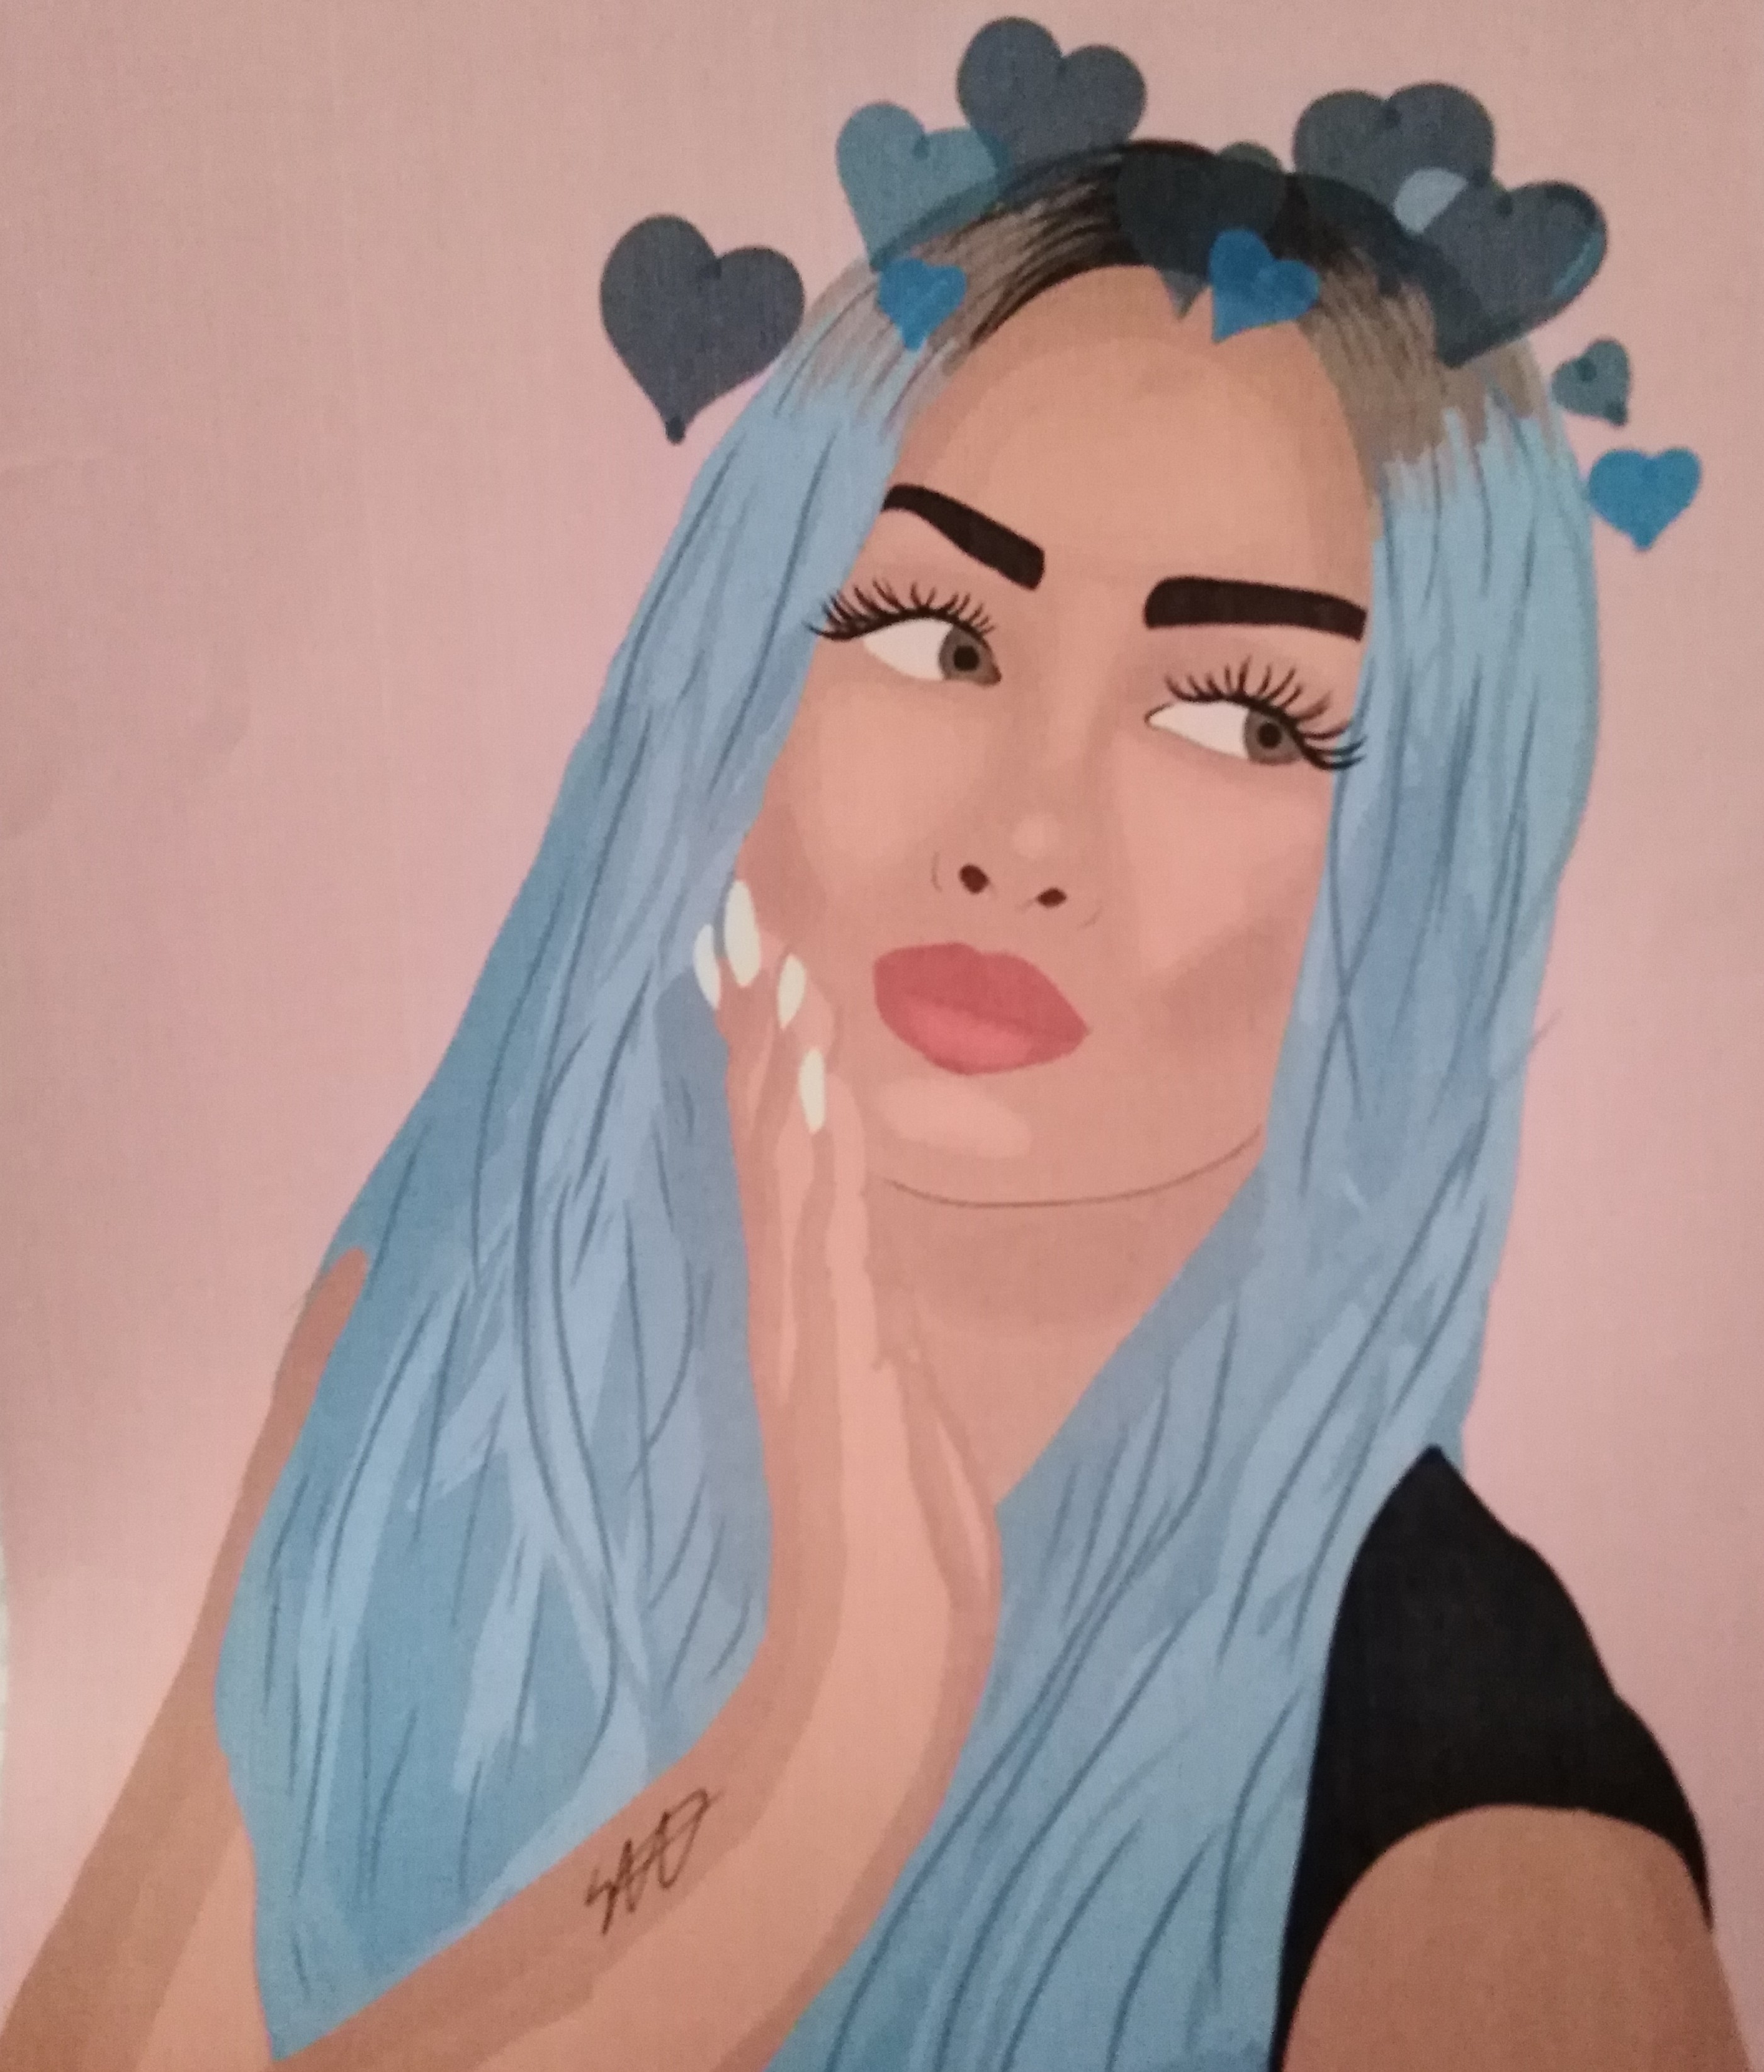 Talented 12 year old wows with digital illustrations